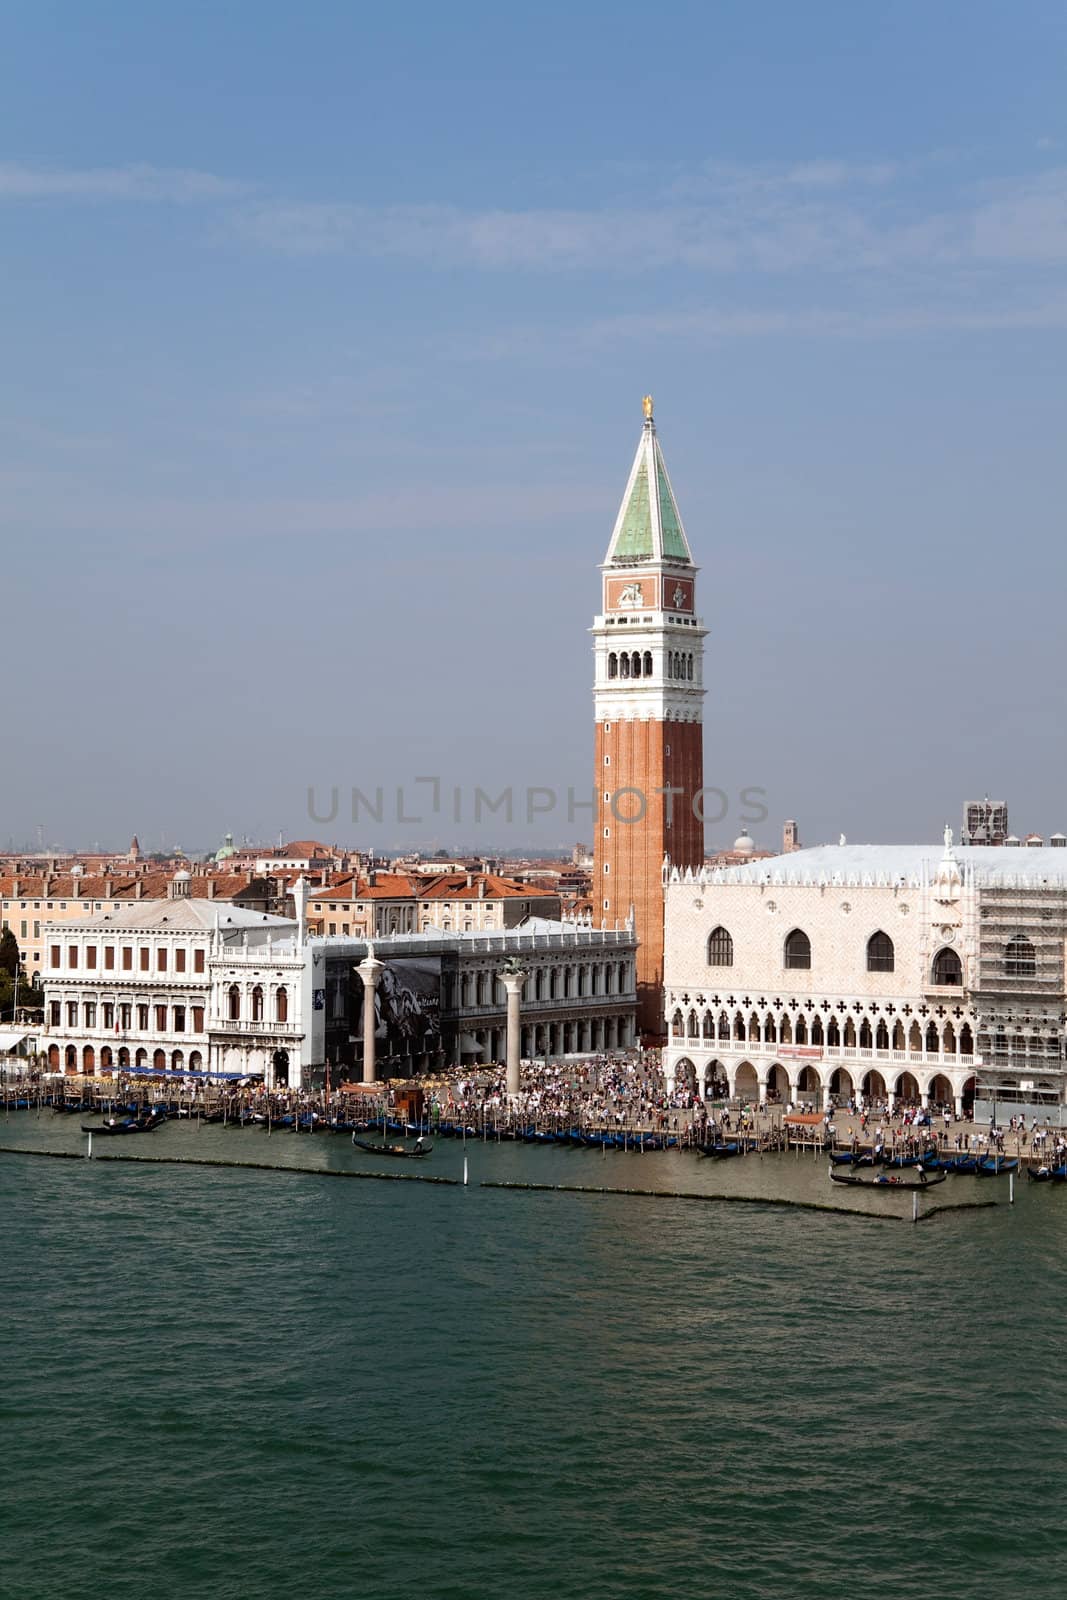 September 25th, 2009  Venice, Italy  The very busy Piazza San Marcos known for being Europes outdoor living room with its famous bell tower and Basilica